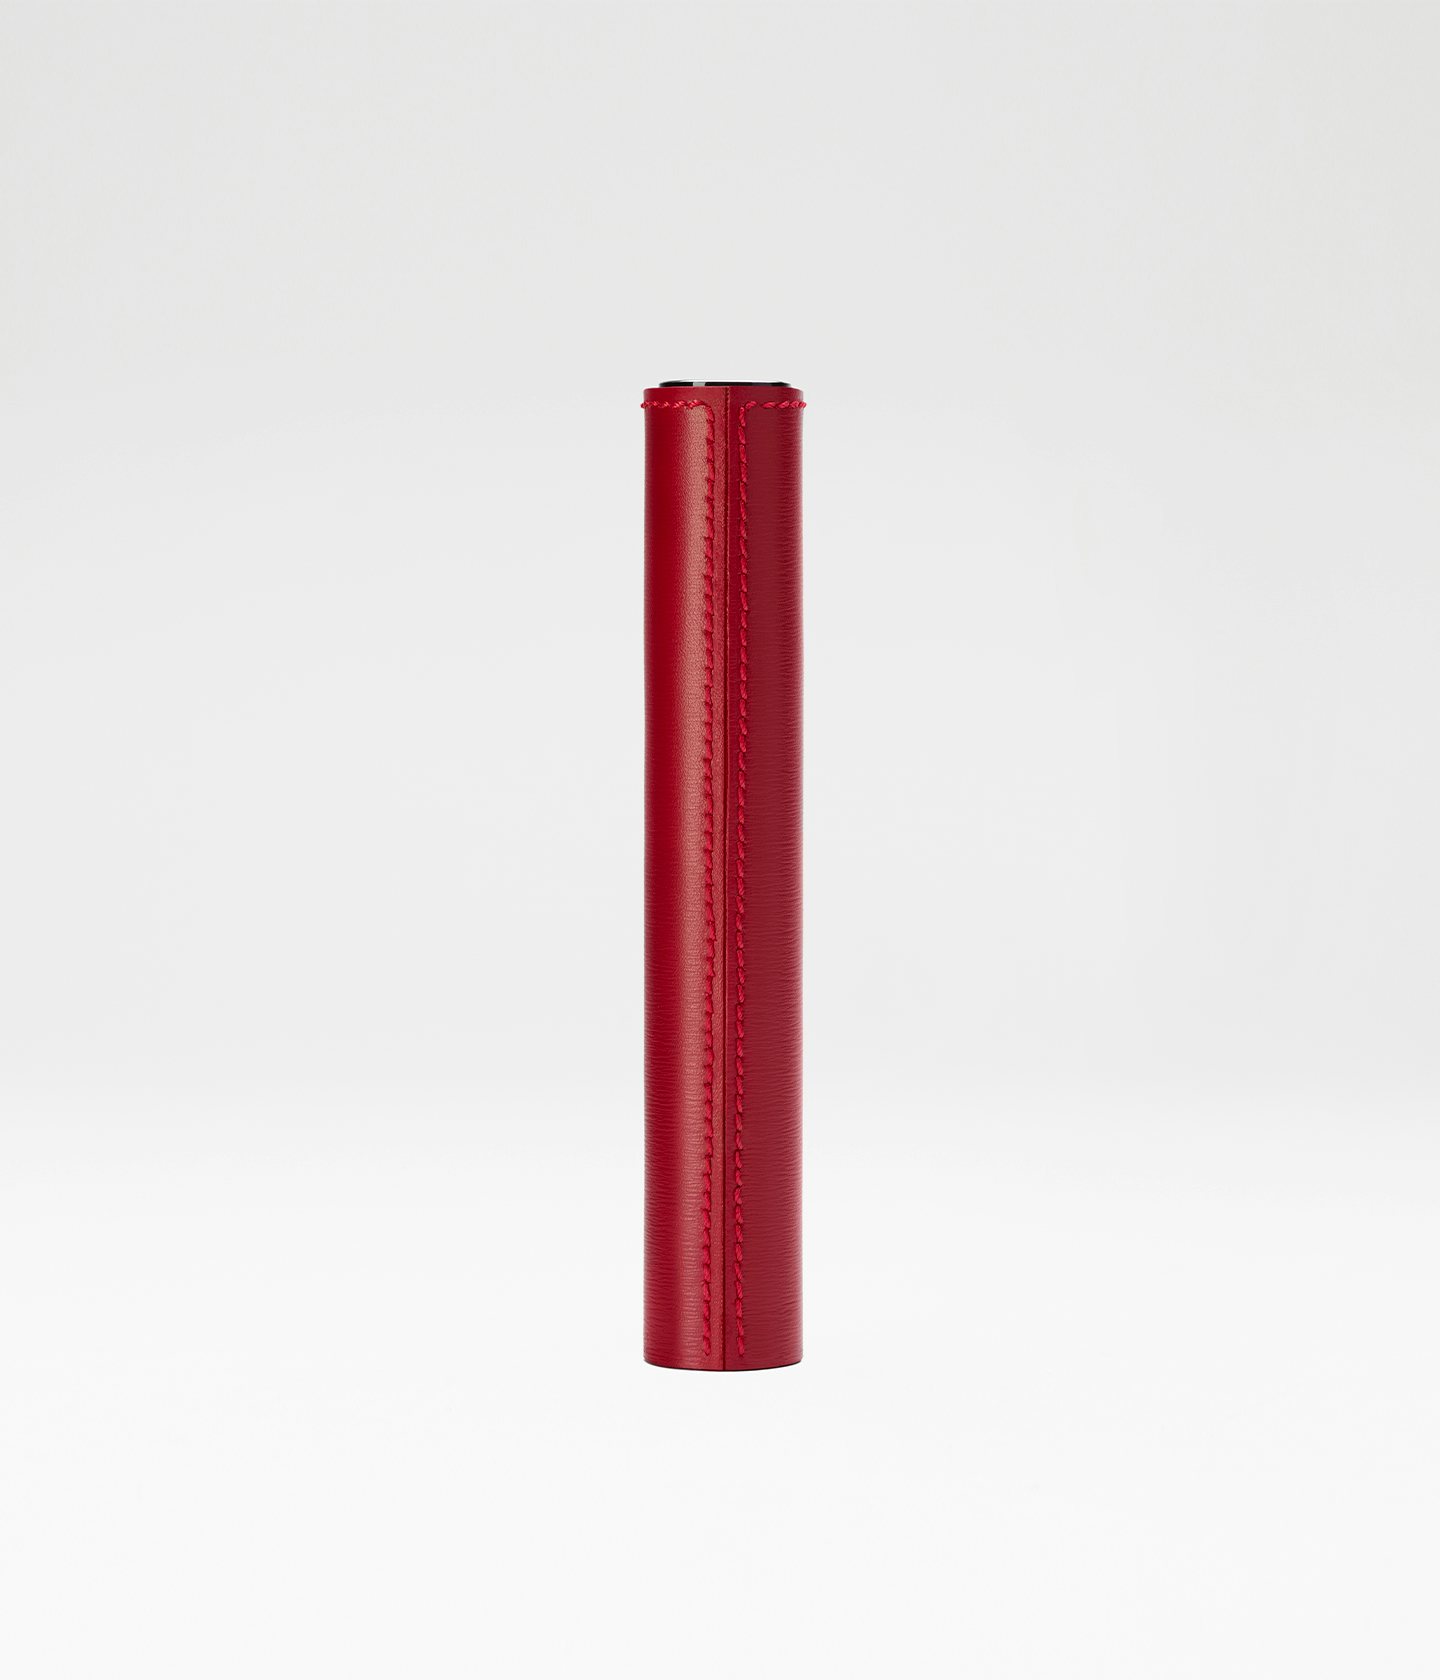 La bouche rouge Red leather sleeve with stitches - back